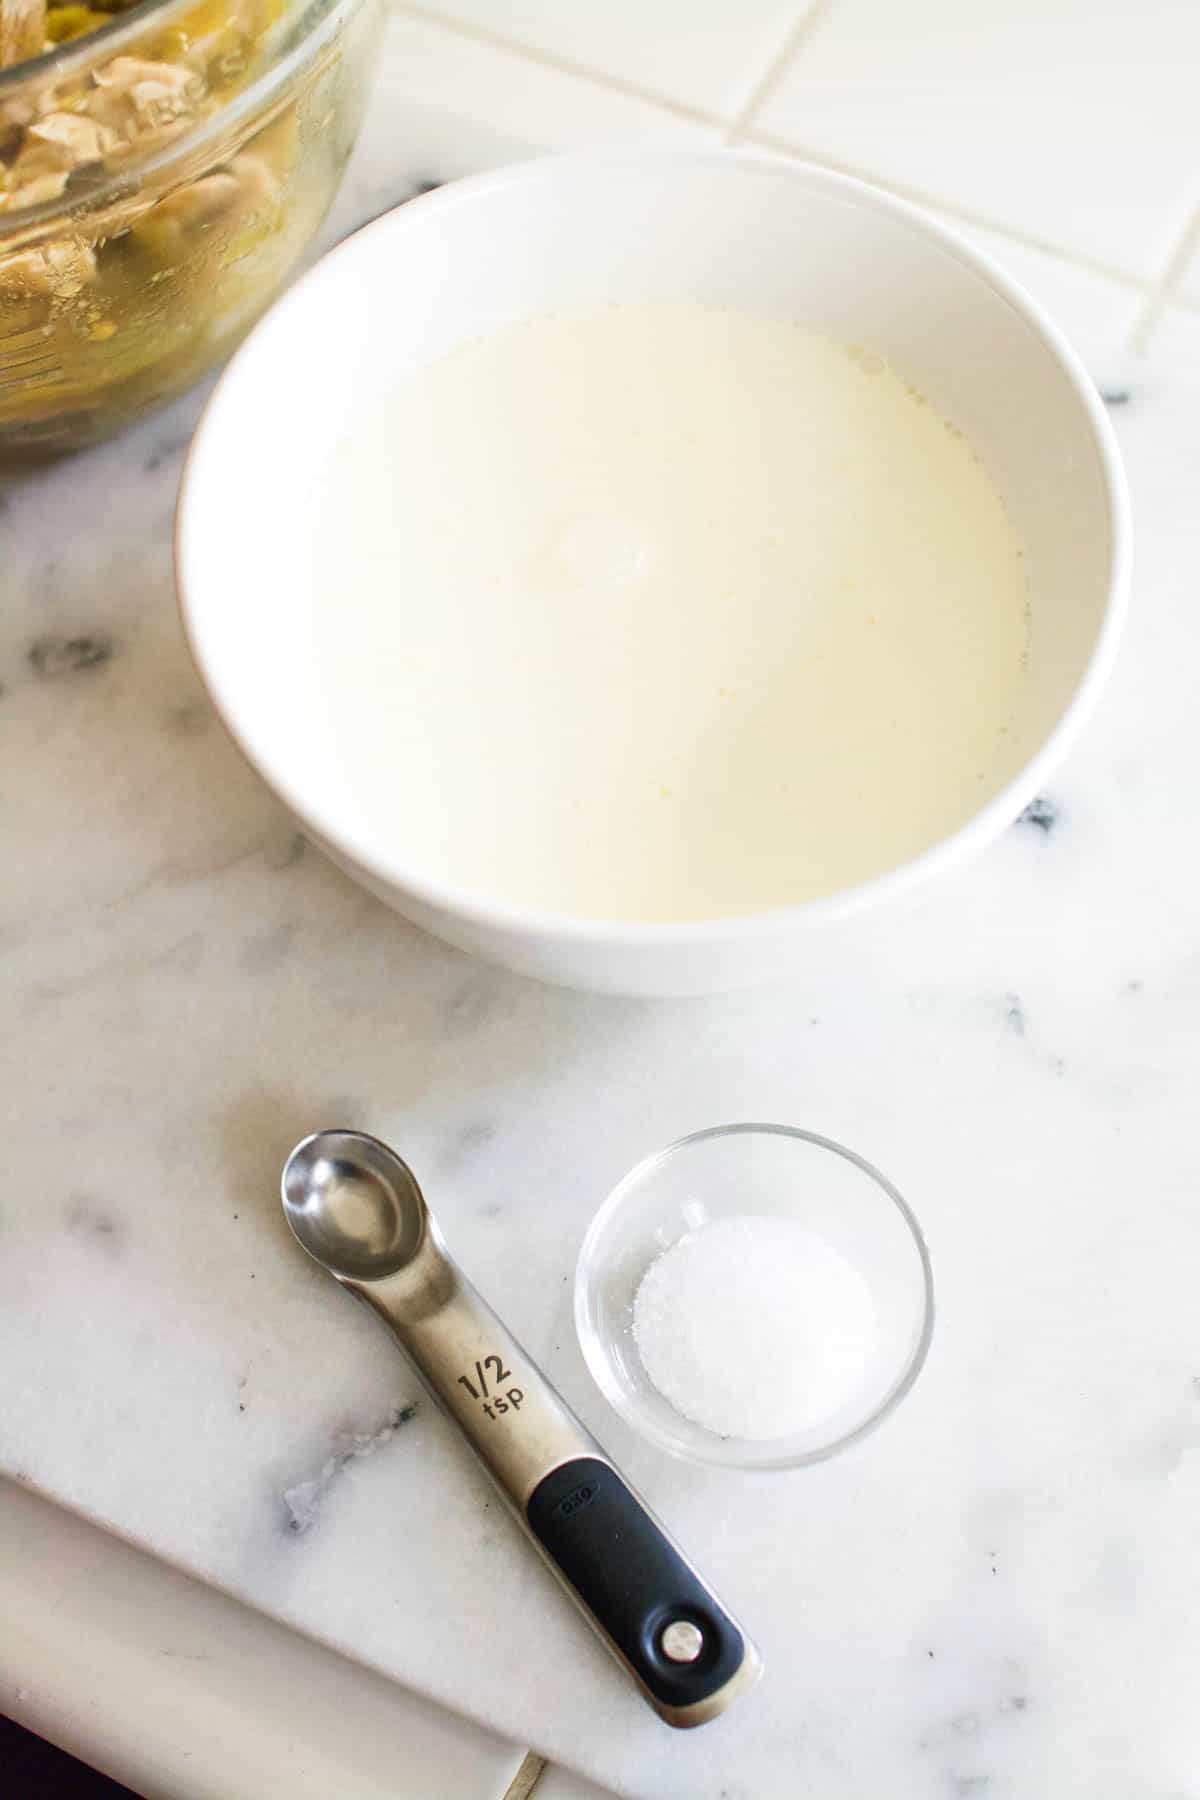 A bowl with whipping cream next to a measuring spoon and salt on a counter.